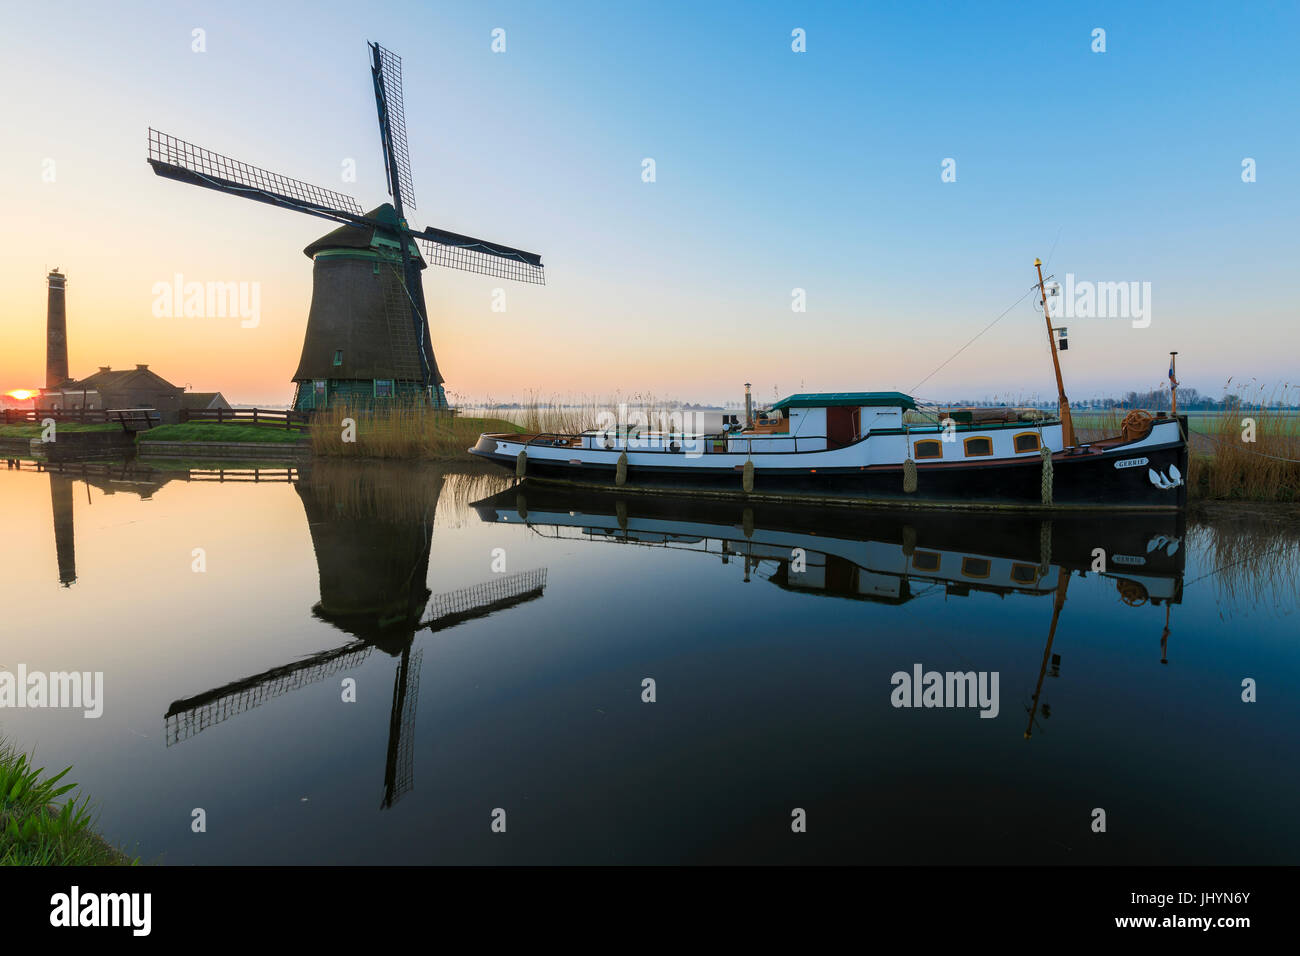 Typical windmill reflected in the canal at dawn, Berkmeer, municipality of Koggenland, North Holland, The Netherlands, Europe Stock Photo